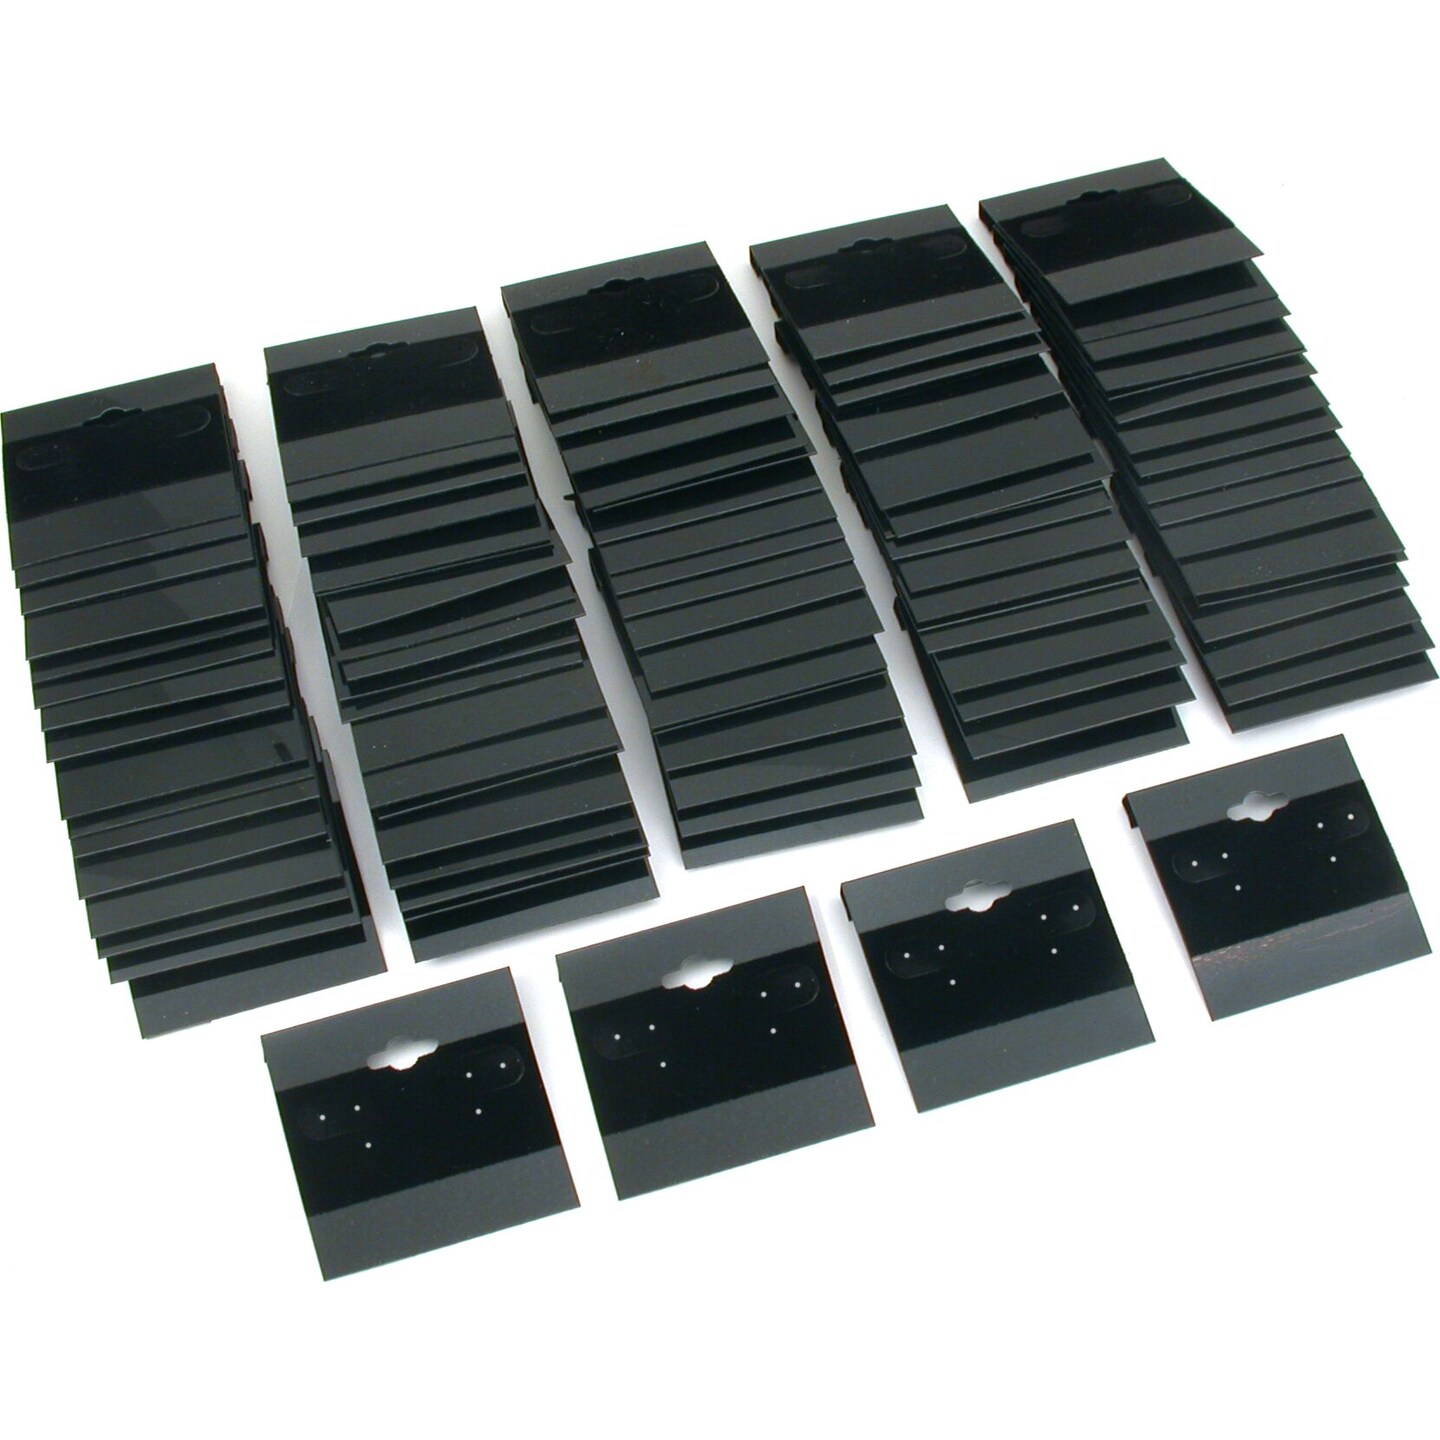 100 Black Earring Cards Revolving Rotating Display 3 Sided Stand